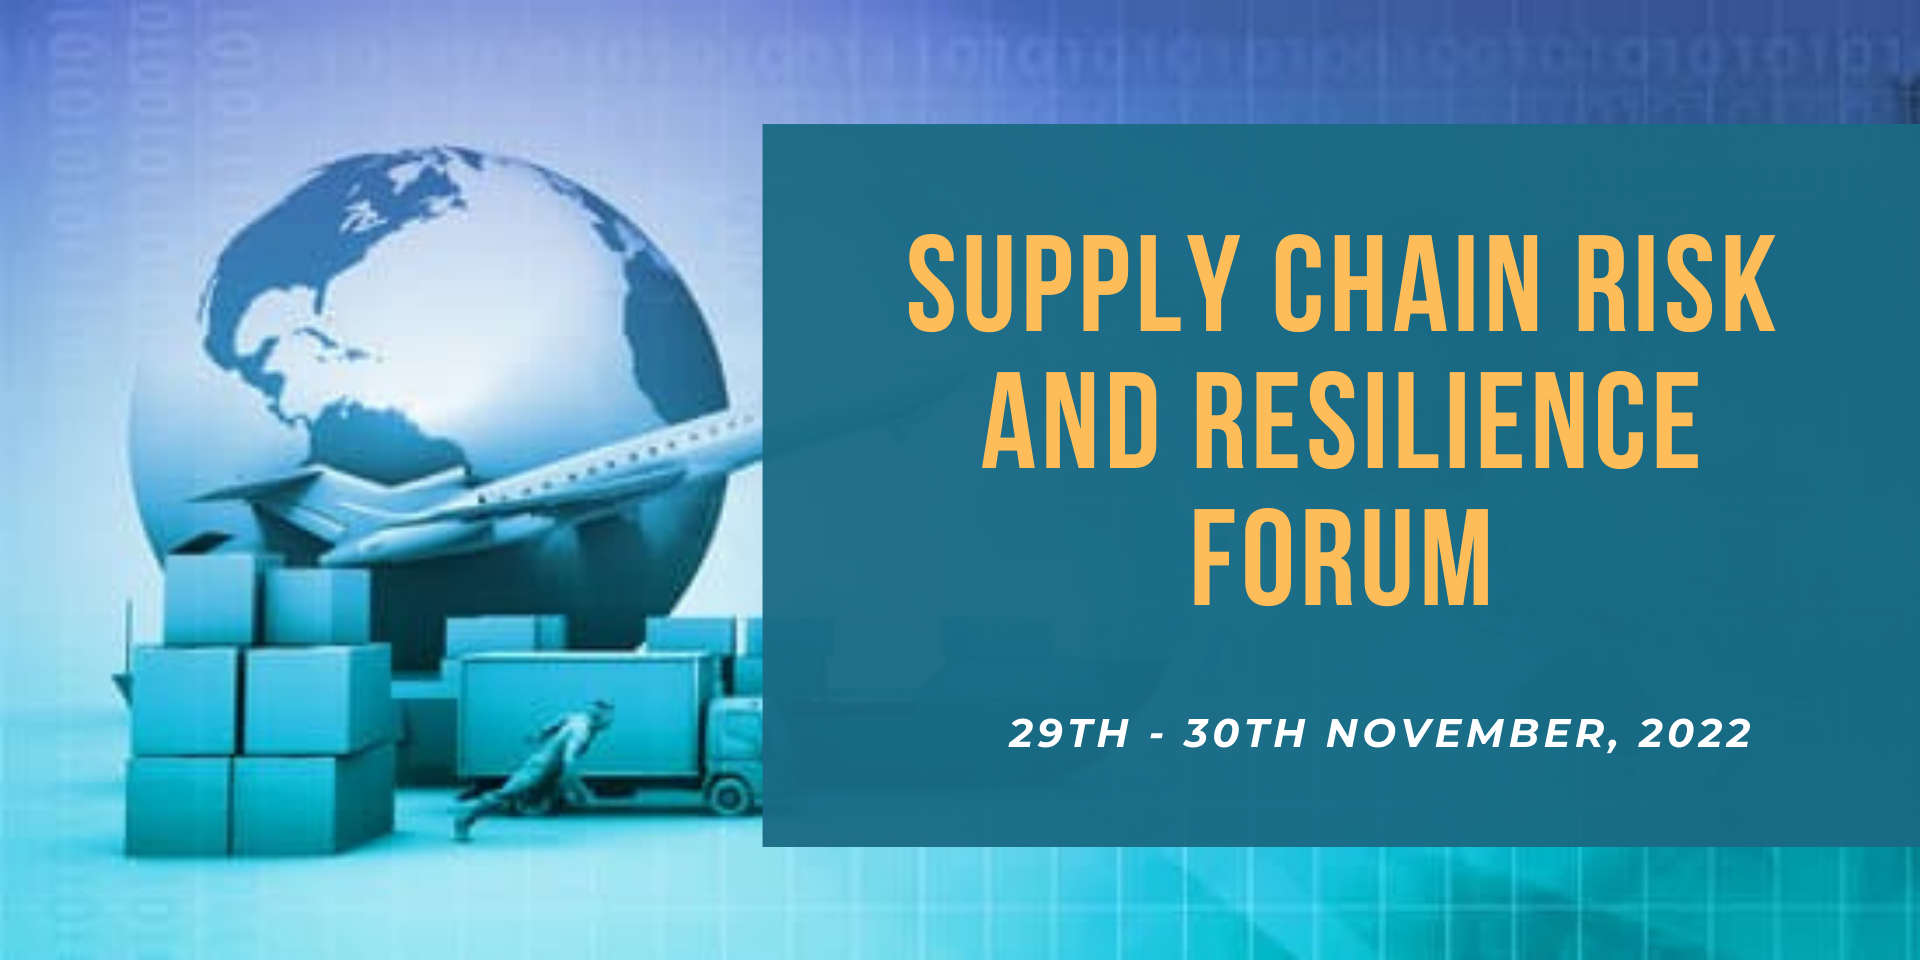 Supply Chain Risk and Resilience Forum organized by Leadvent Group